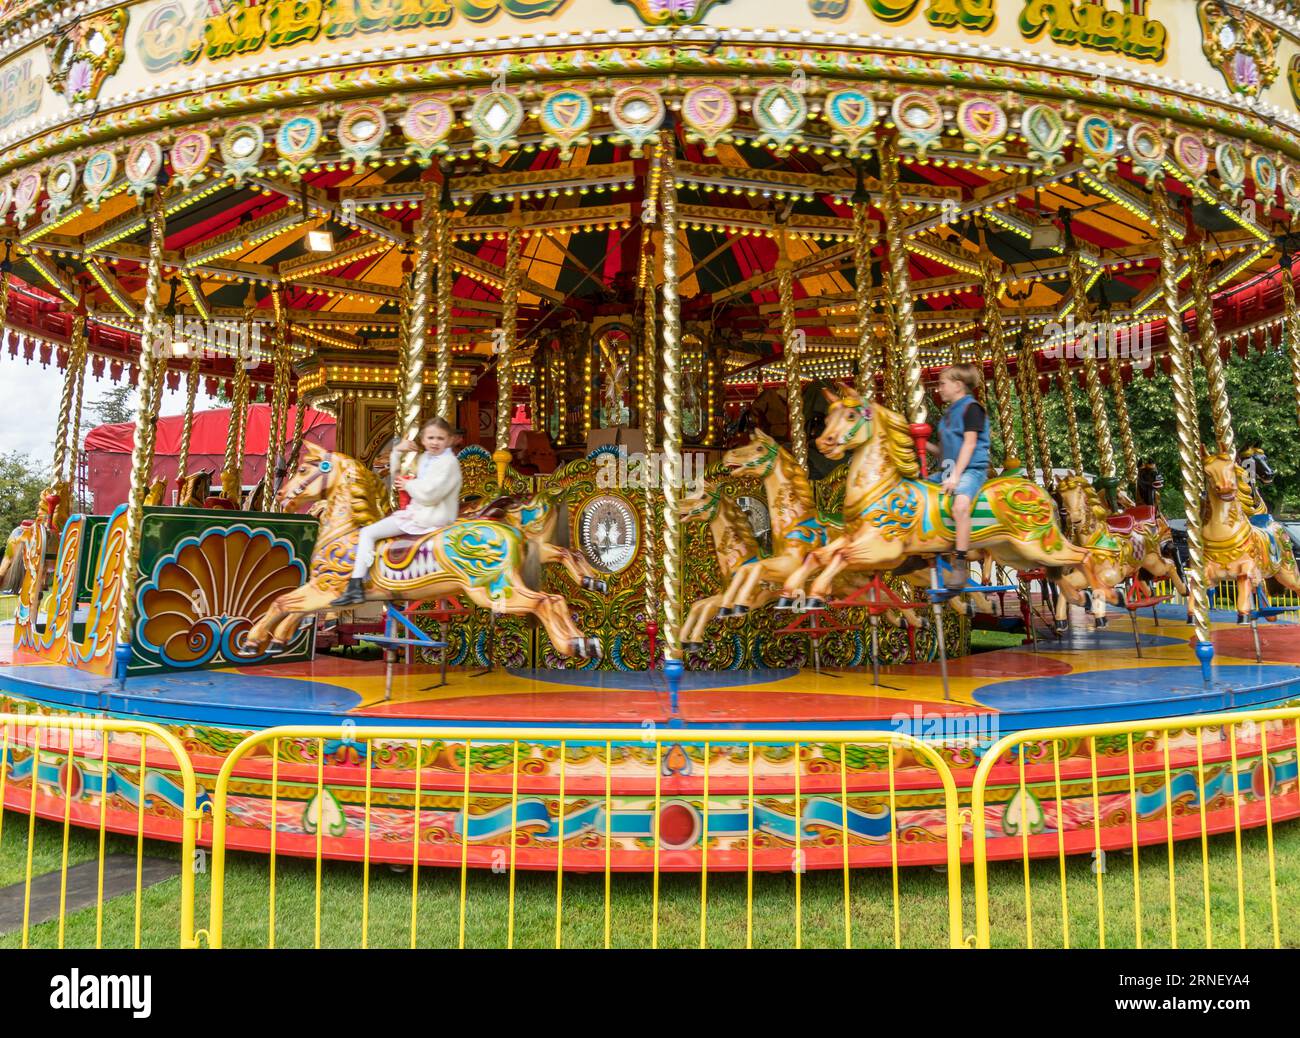 Children on galloper carousel moving at speed, The Lawn, Lincoln City, Lincolnshire, England, UK Stock Photo